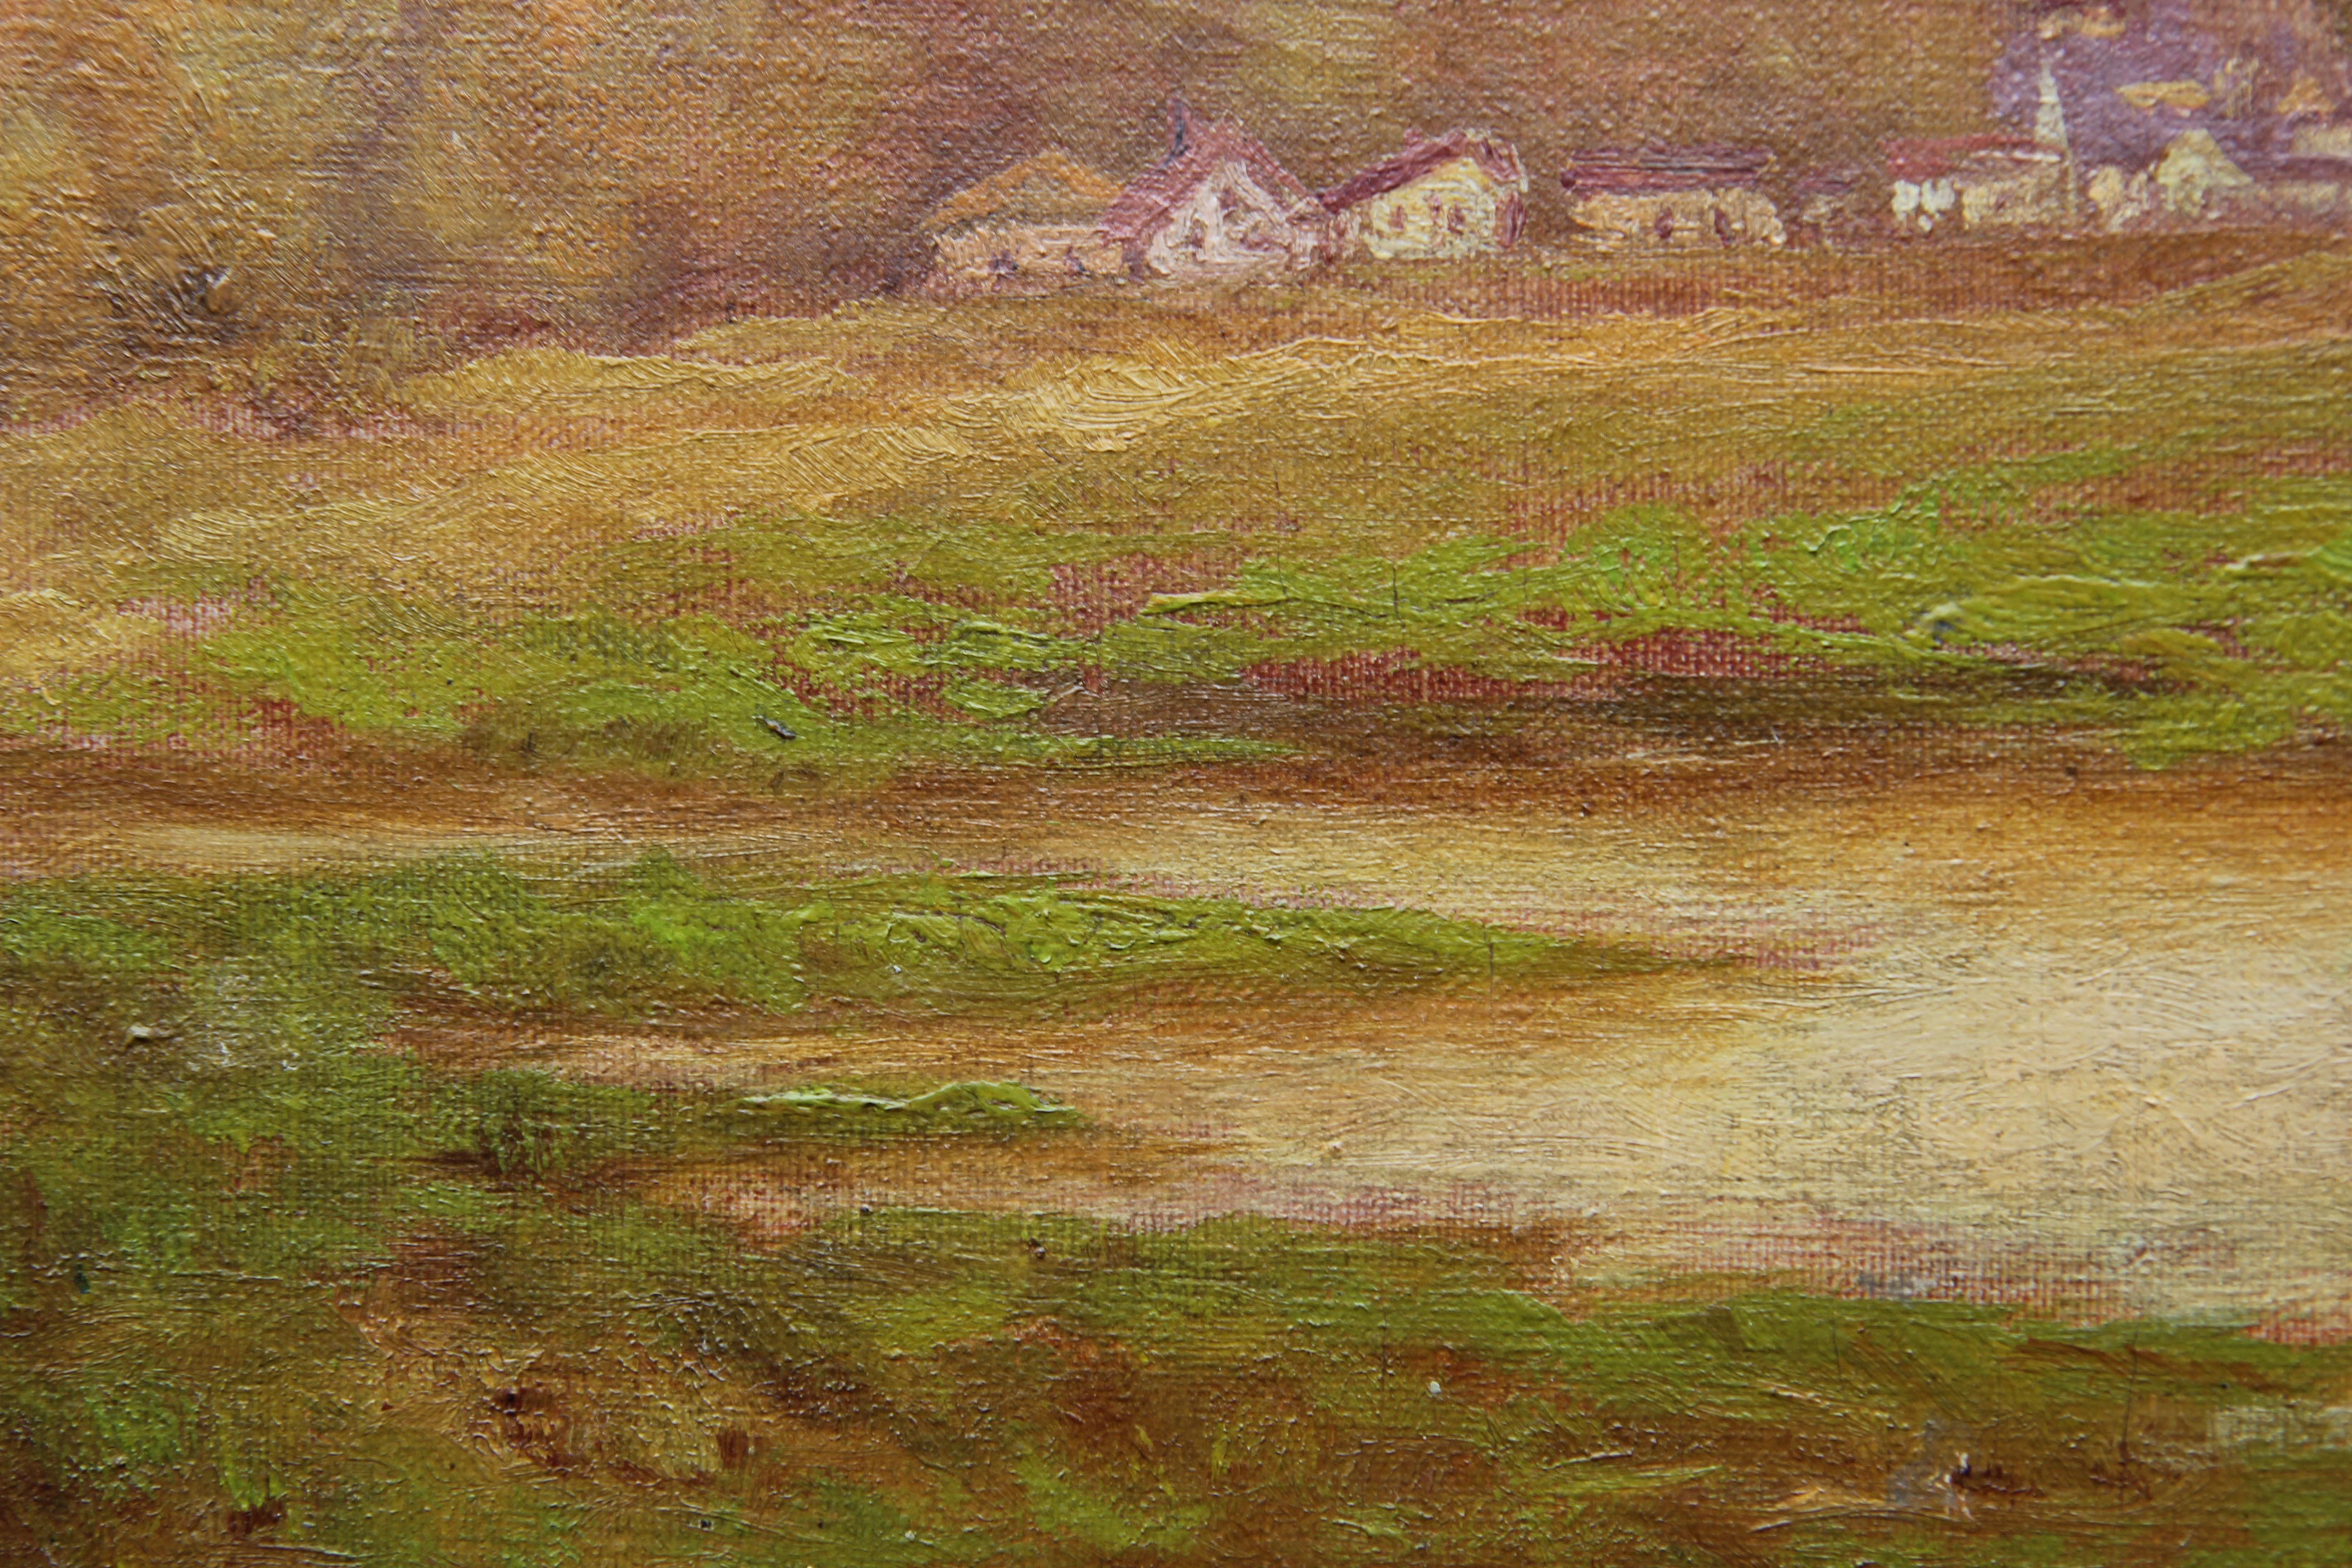 Pastoral Landscape of a Small Town with Hills and a Lake 3